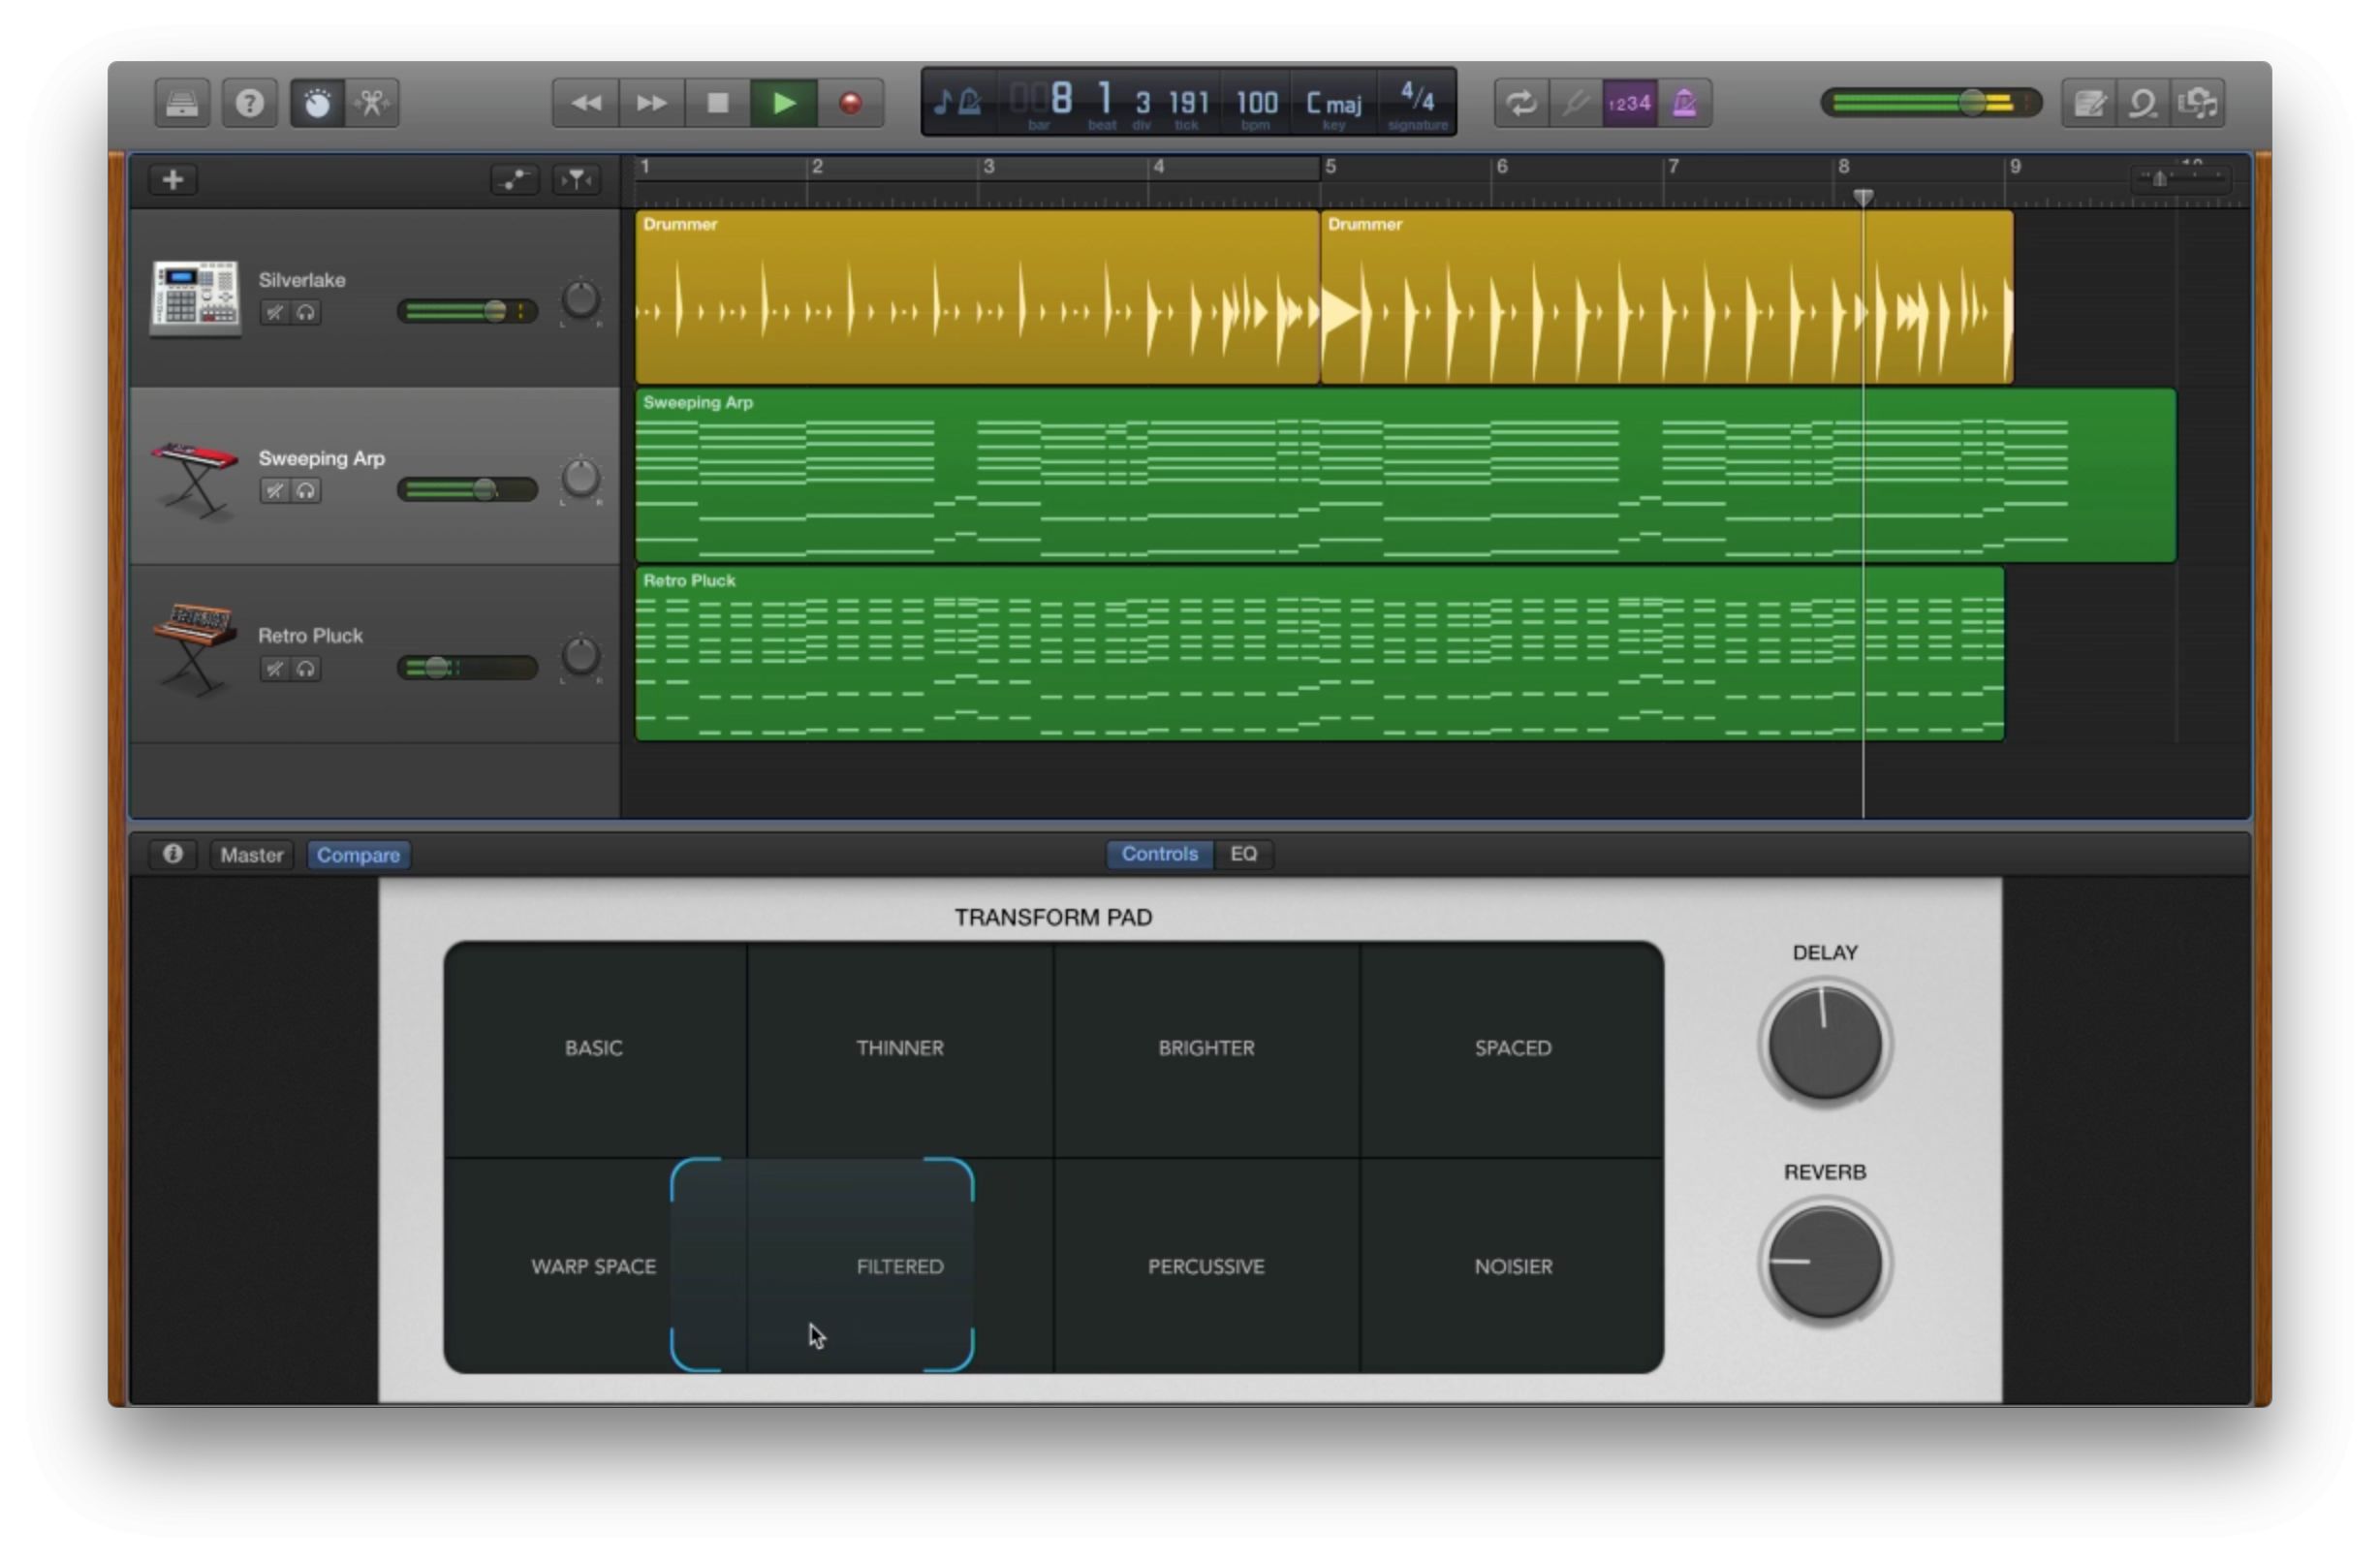 The new Transform Pad Smart Control allows for easy and effective morphing of synth sounds.